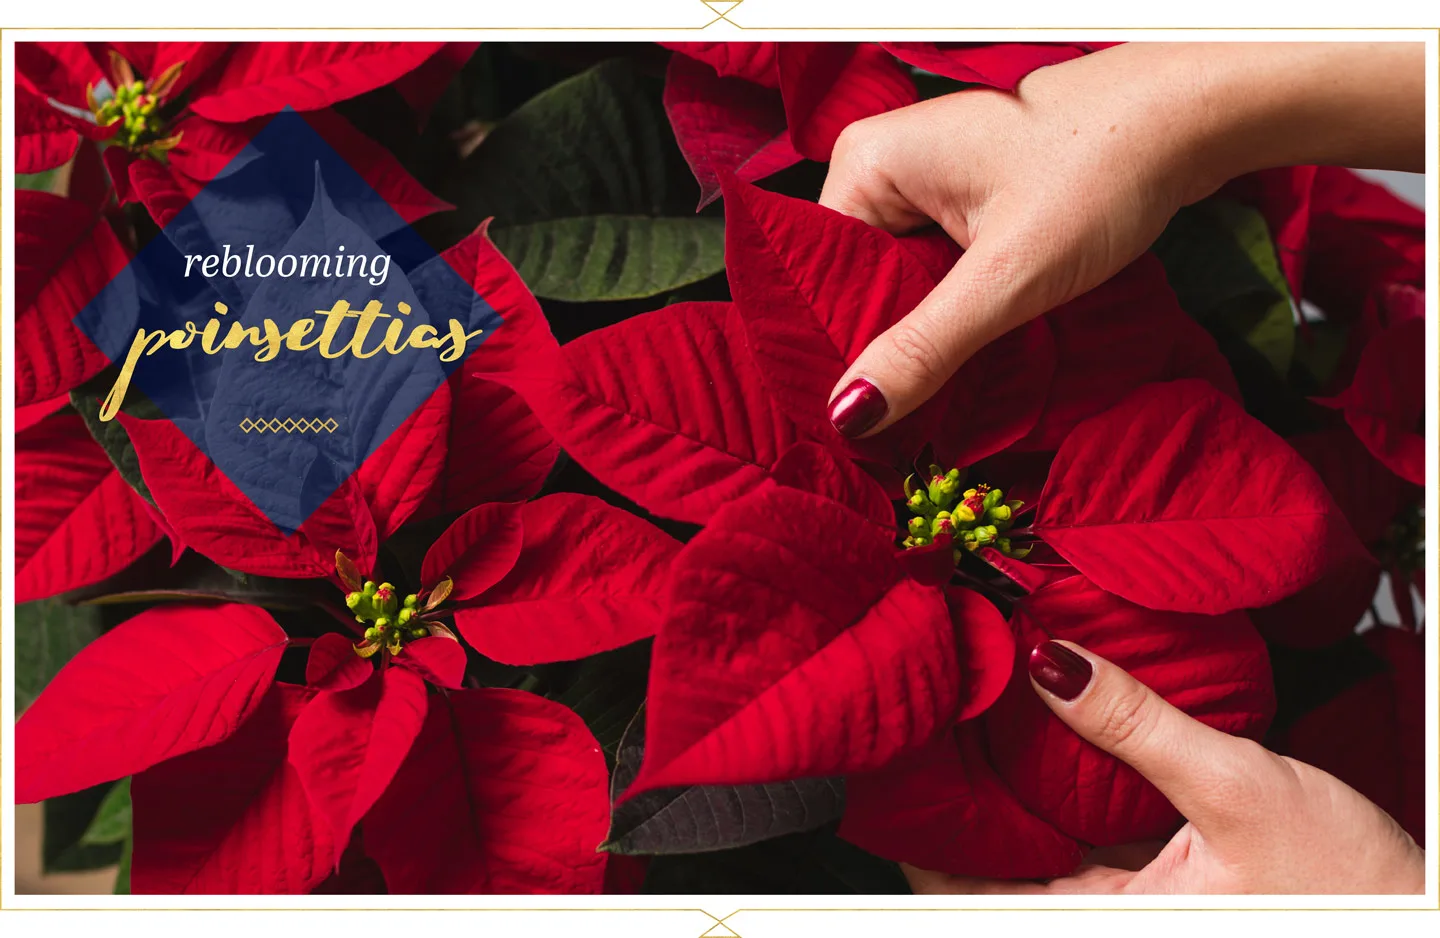 Poinsettia Care Guide: Tips and Tricks